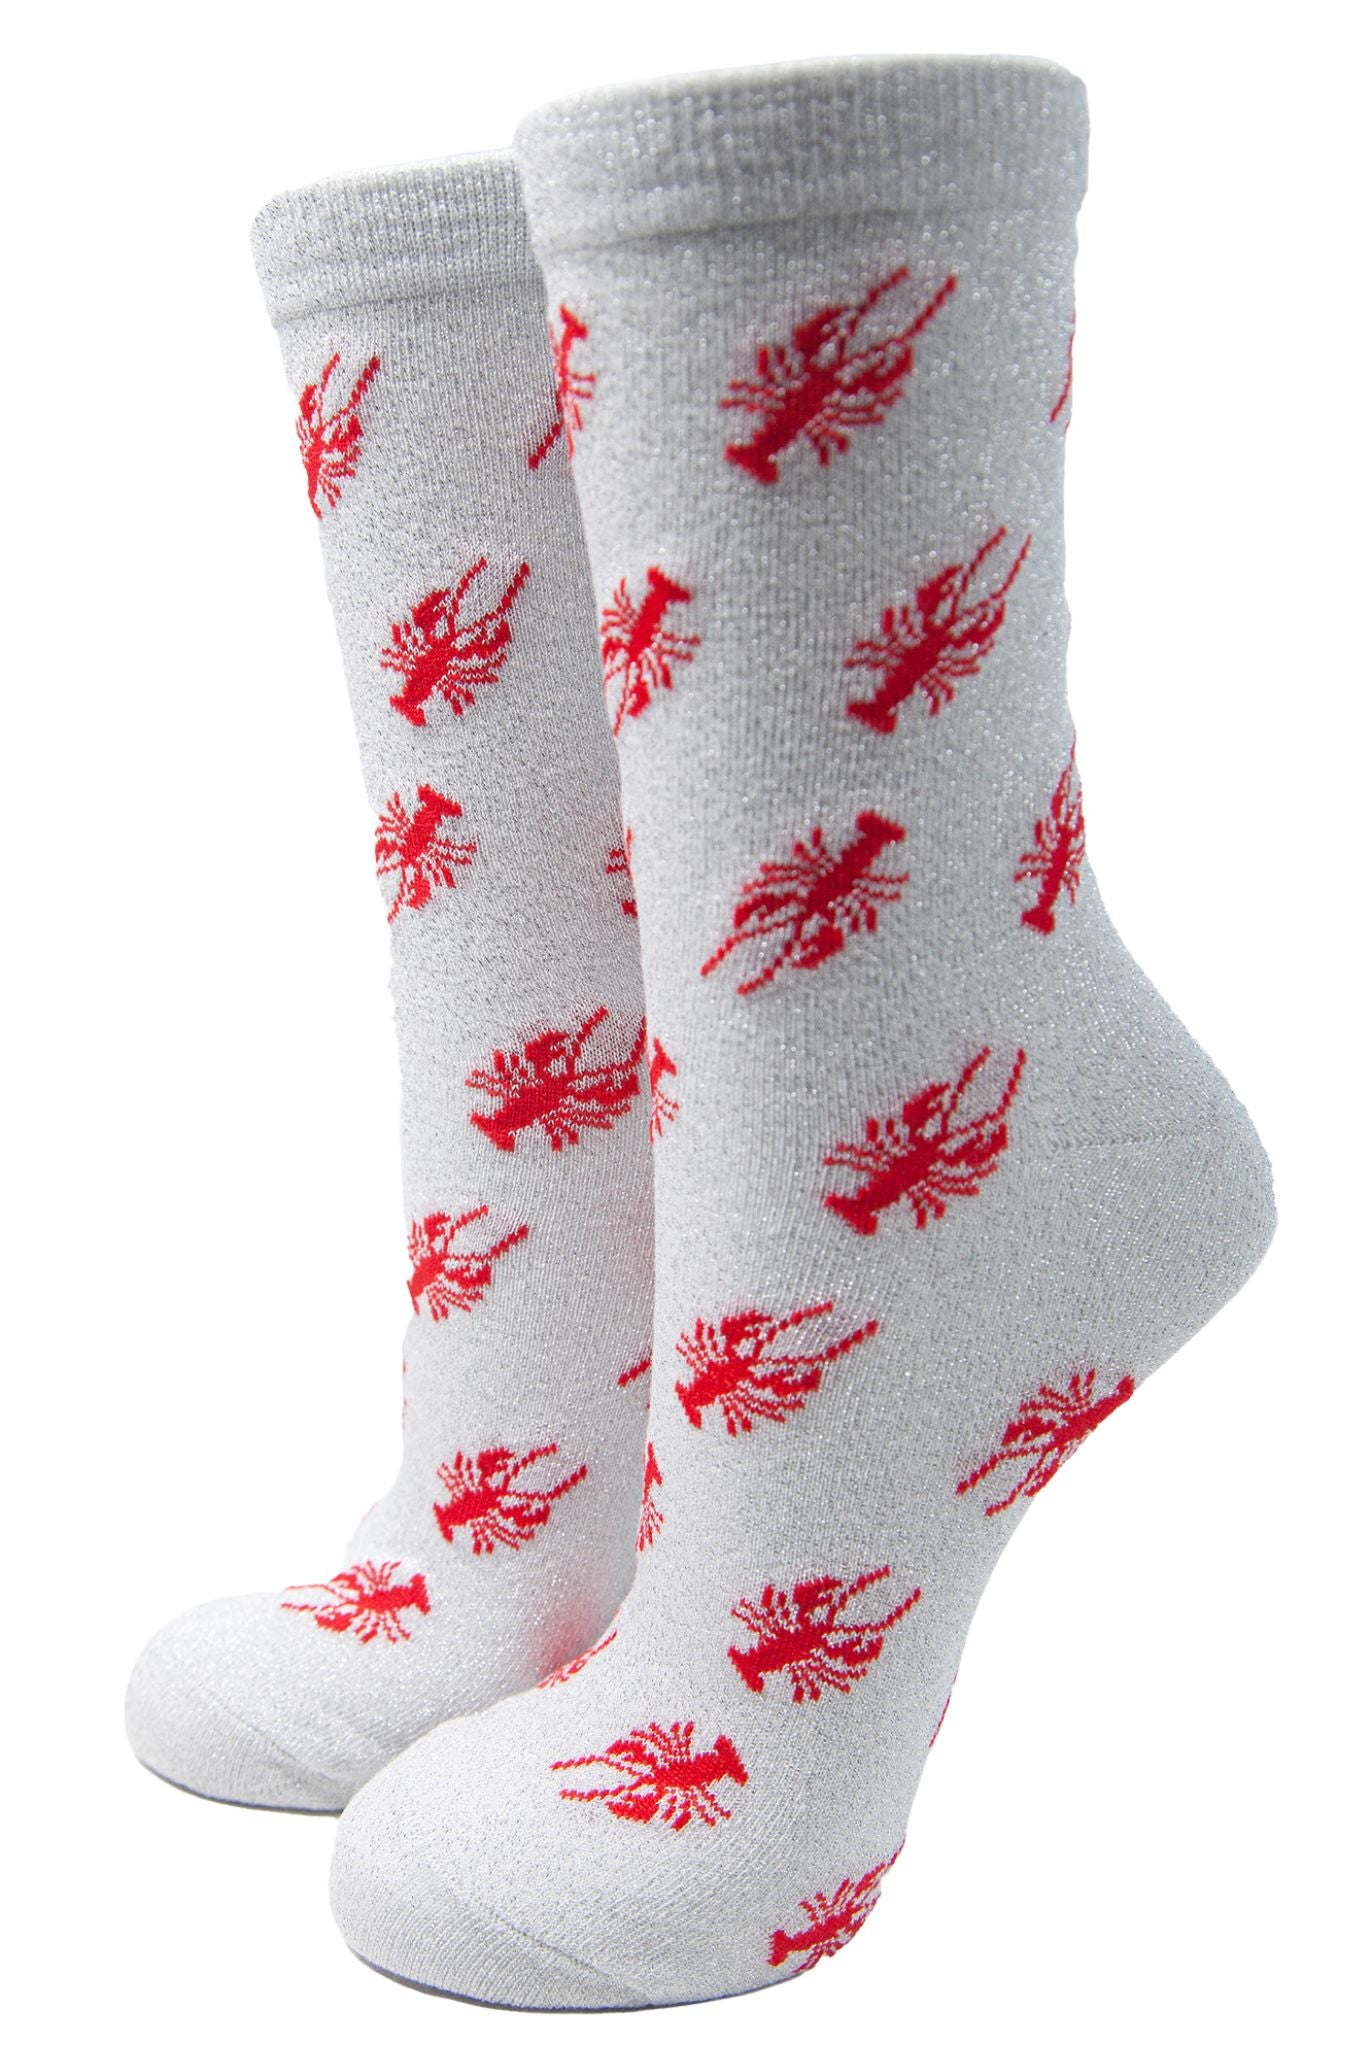 white socks with an all over silver glitter shimmer with red lobster pattern